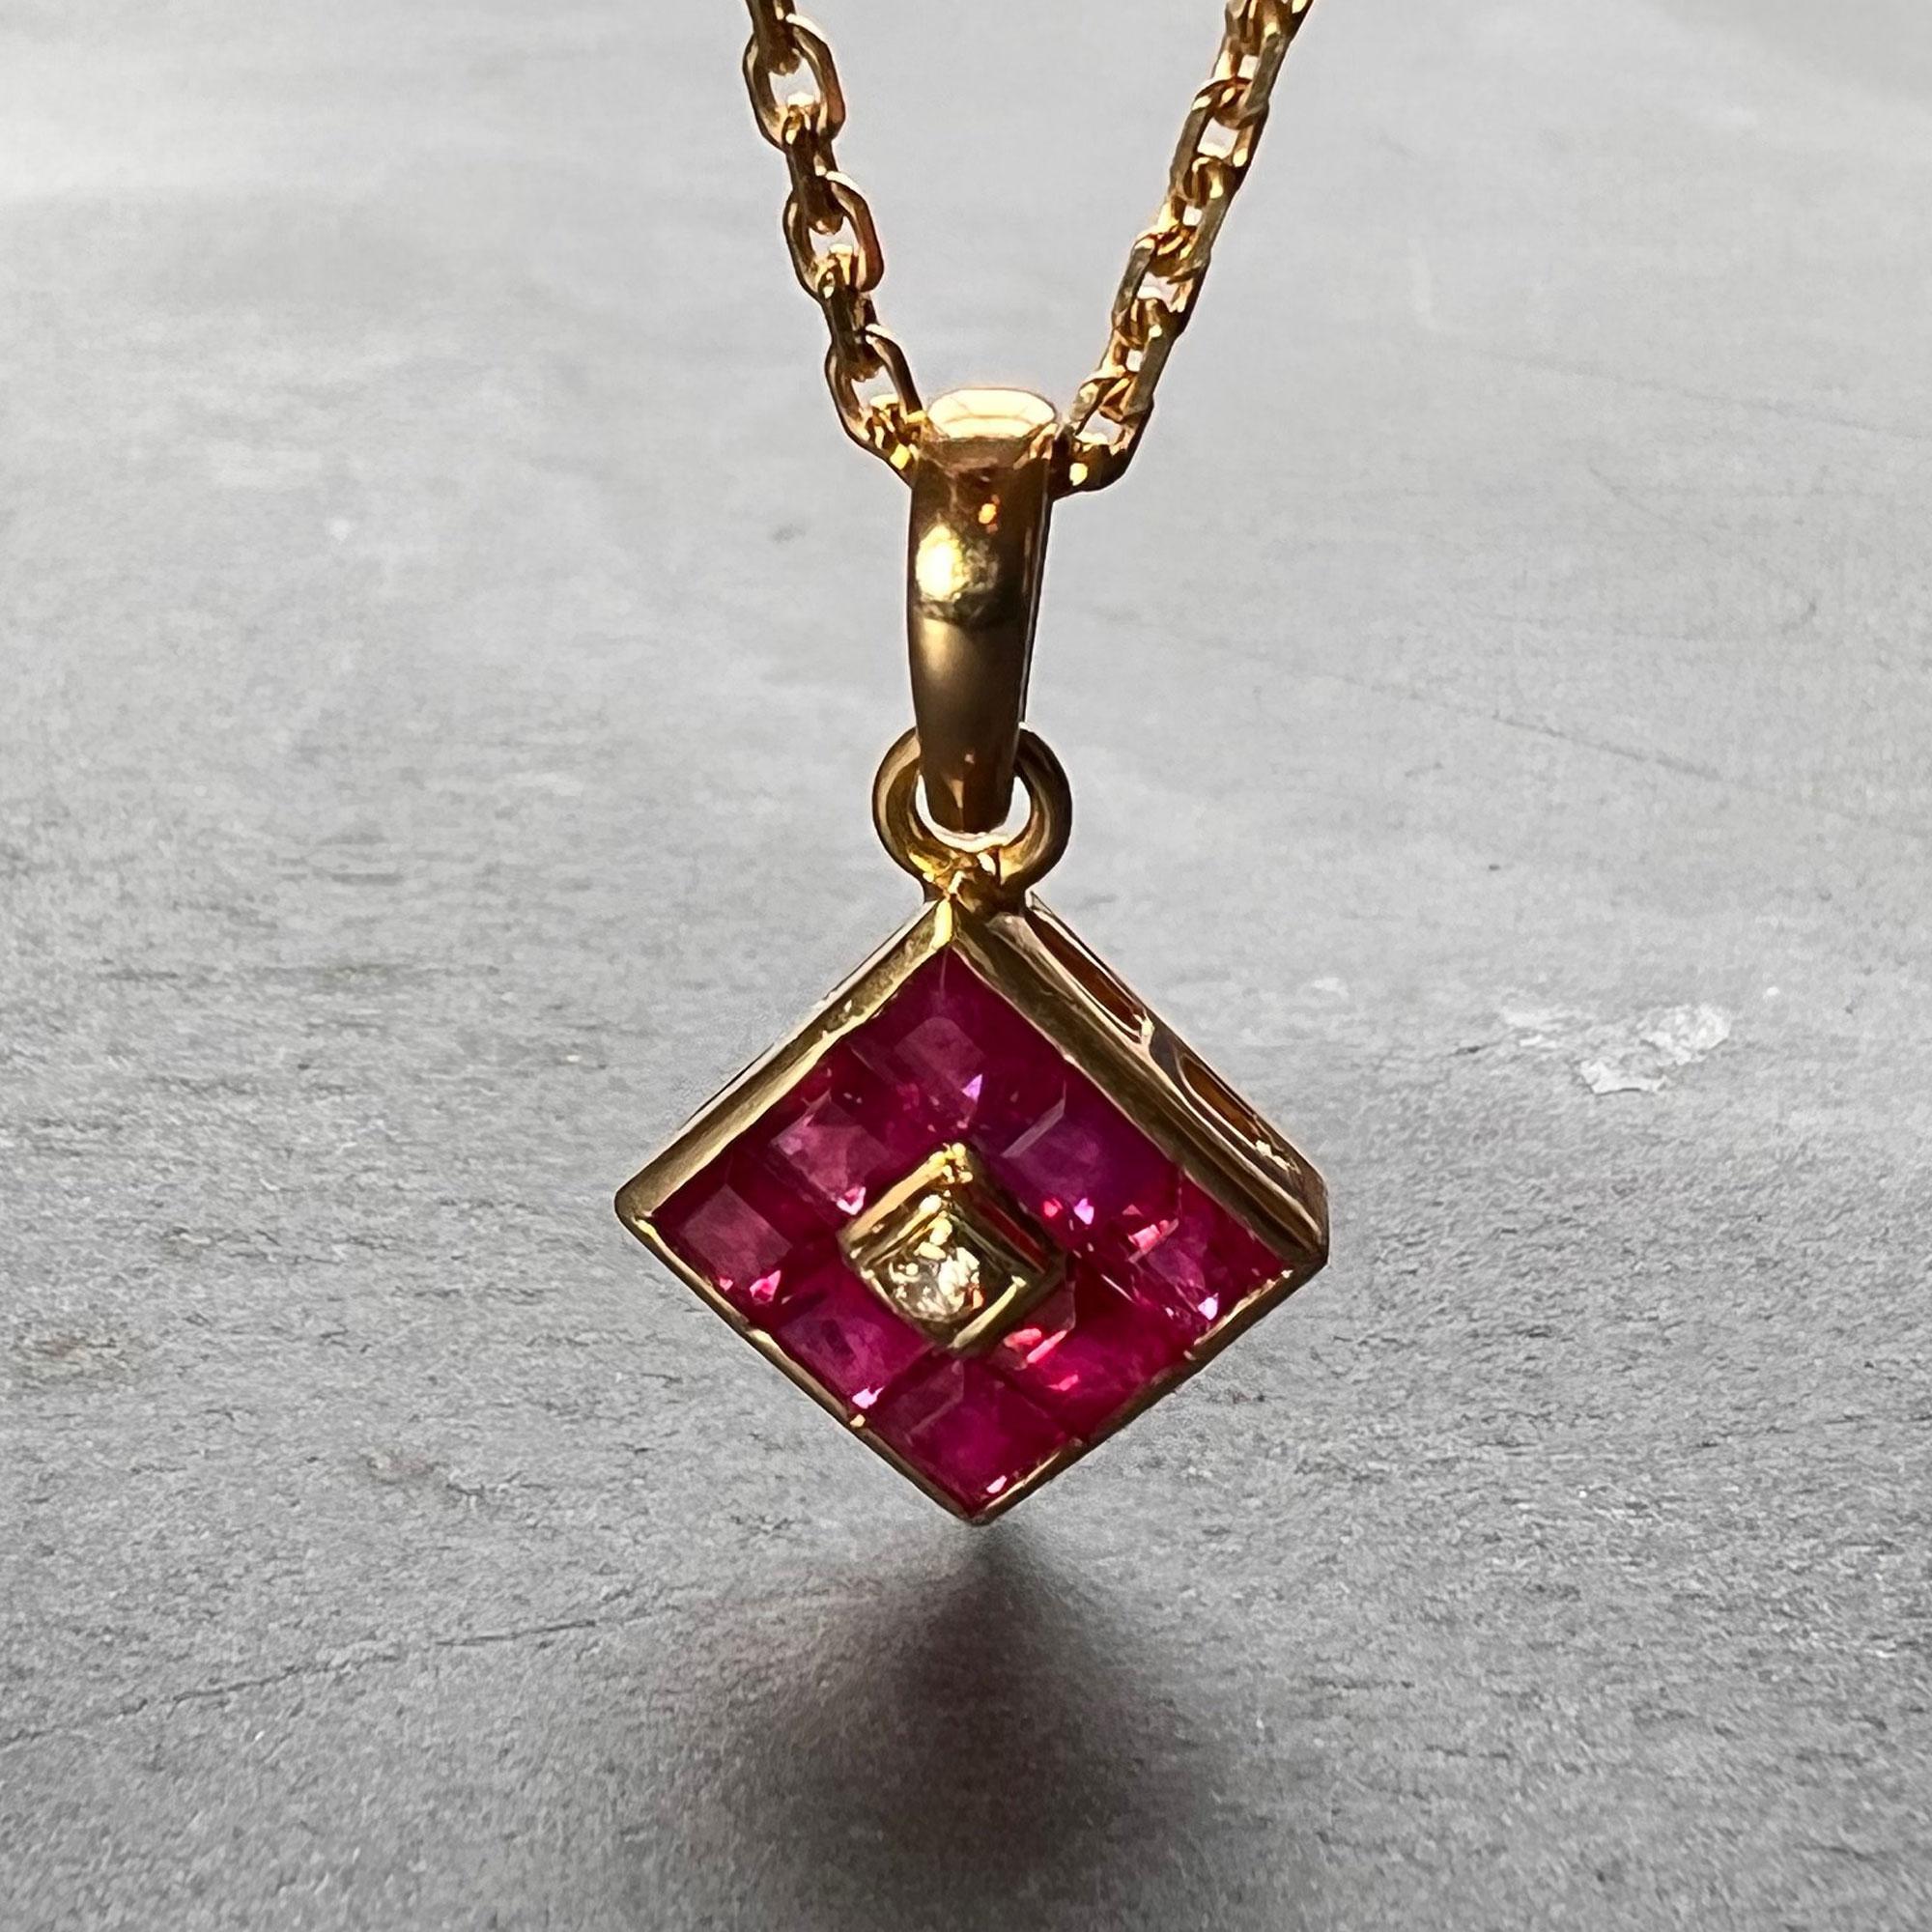 An 18 karat (18K) yellow gold cluster pendant designed as a yellow gold angled square set with eight red square cut rubies surrounding a round brilliant cut diamond. Stamped 750 for 18 karat gold to the inside of the pendant bail.

Diamond weight: